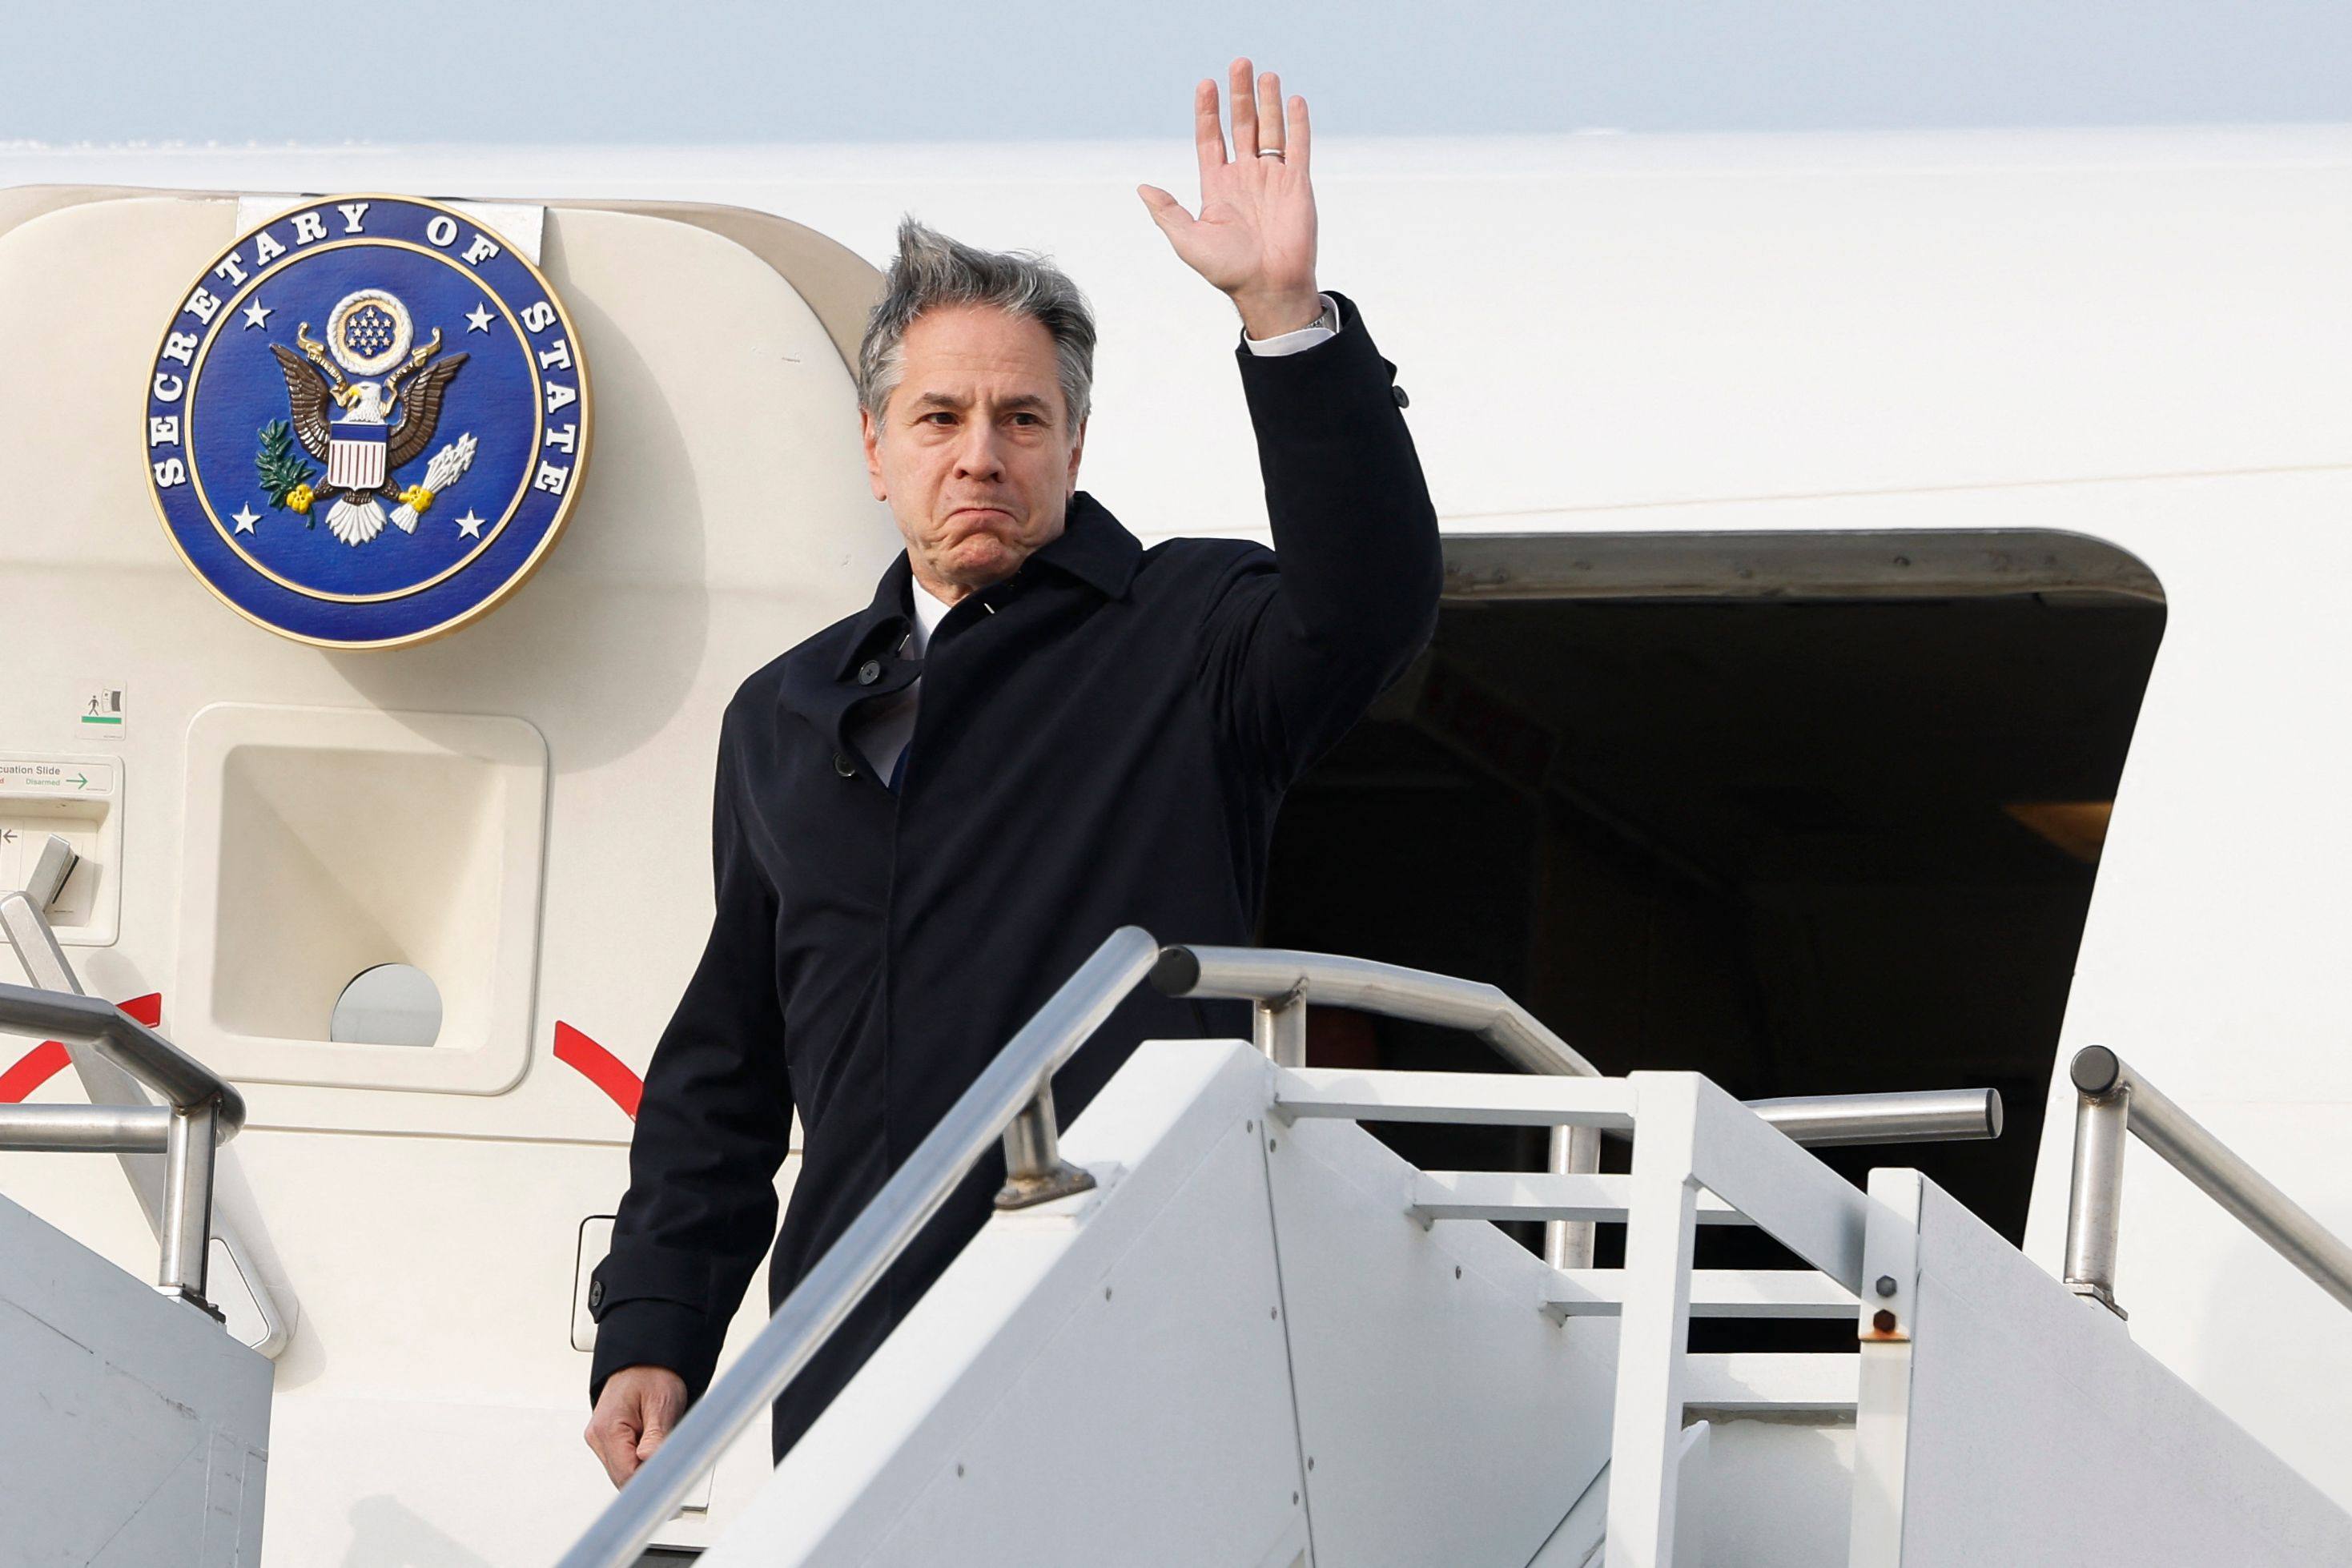 US Secretary of State Antony Blinken waves while disembarking from an aircraft as he arrives at Osan Air Base in Pyeongtaek on March 17. Photo: AFP